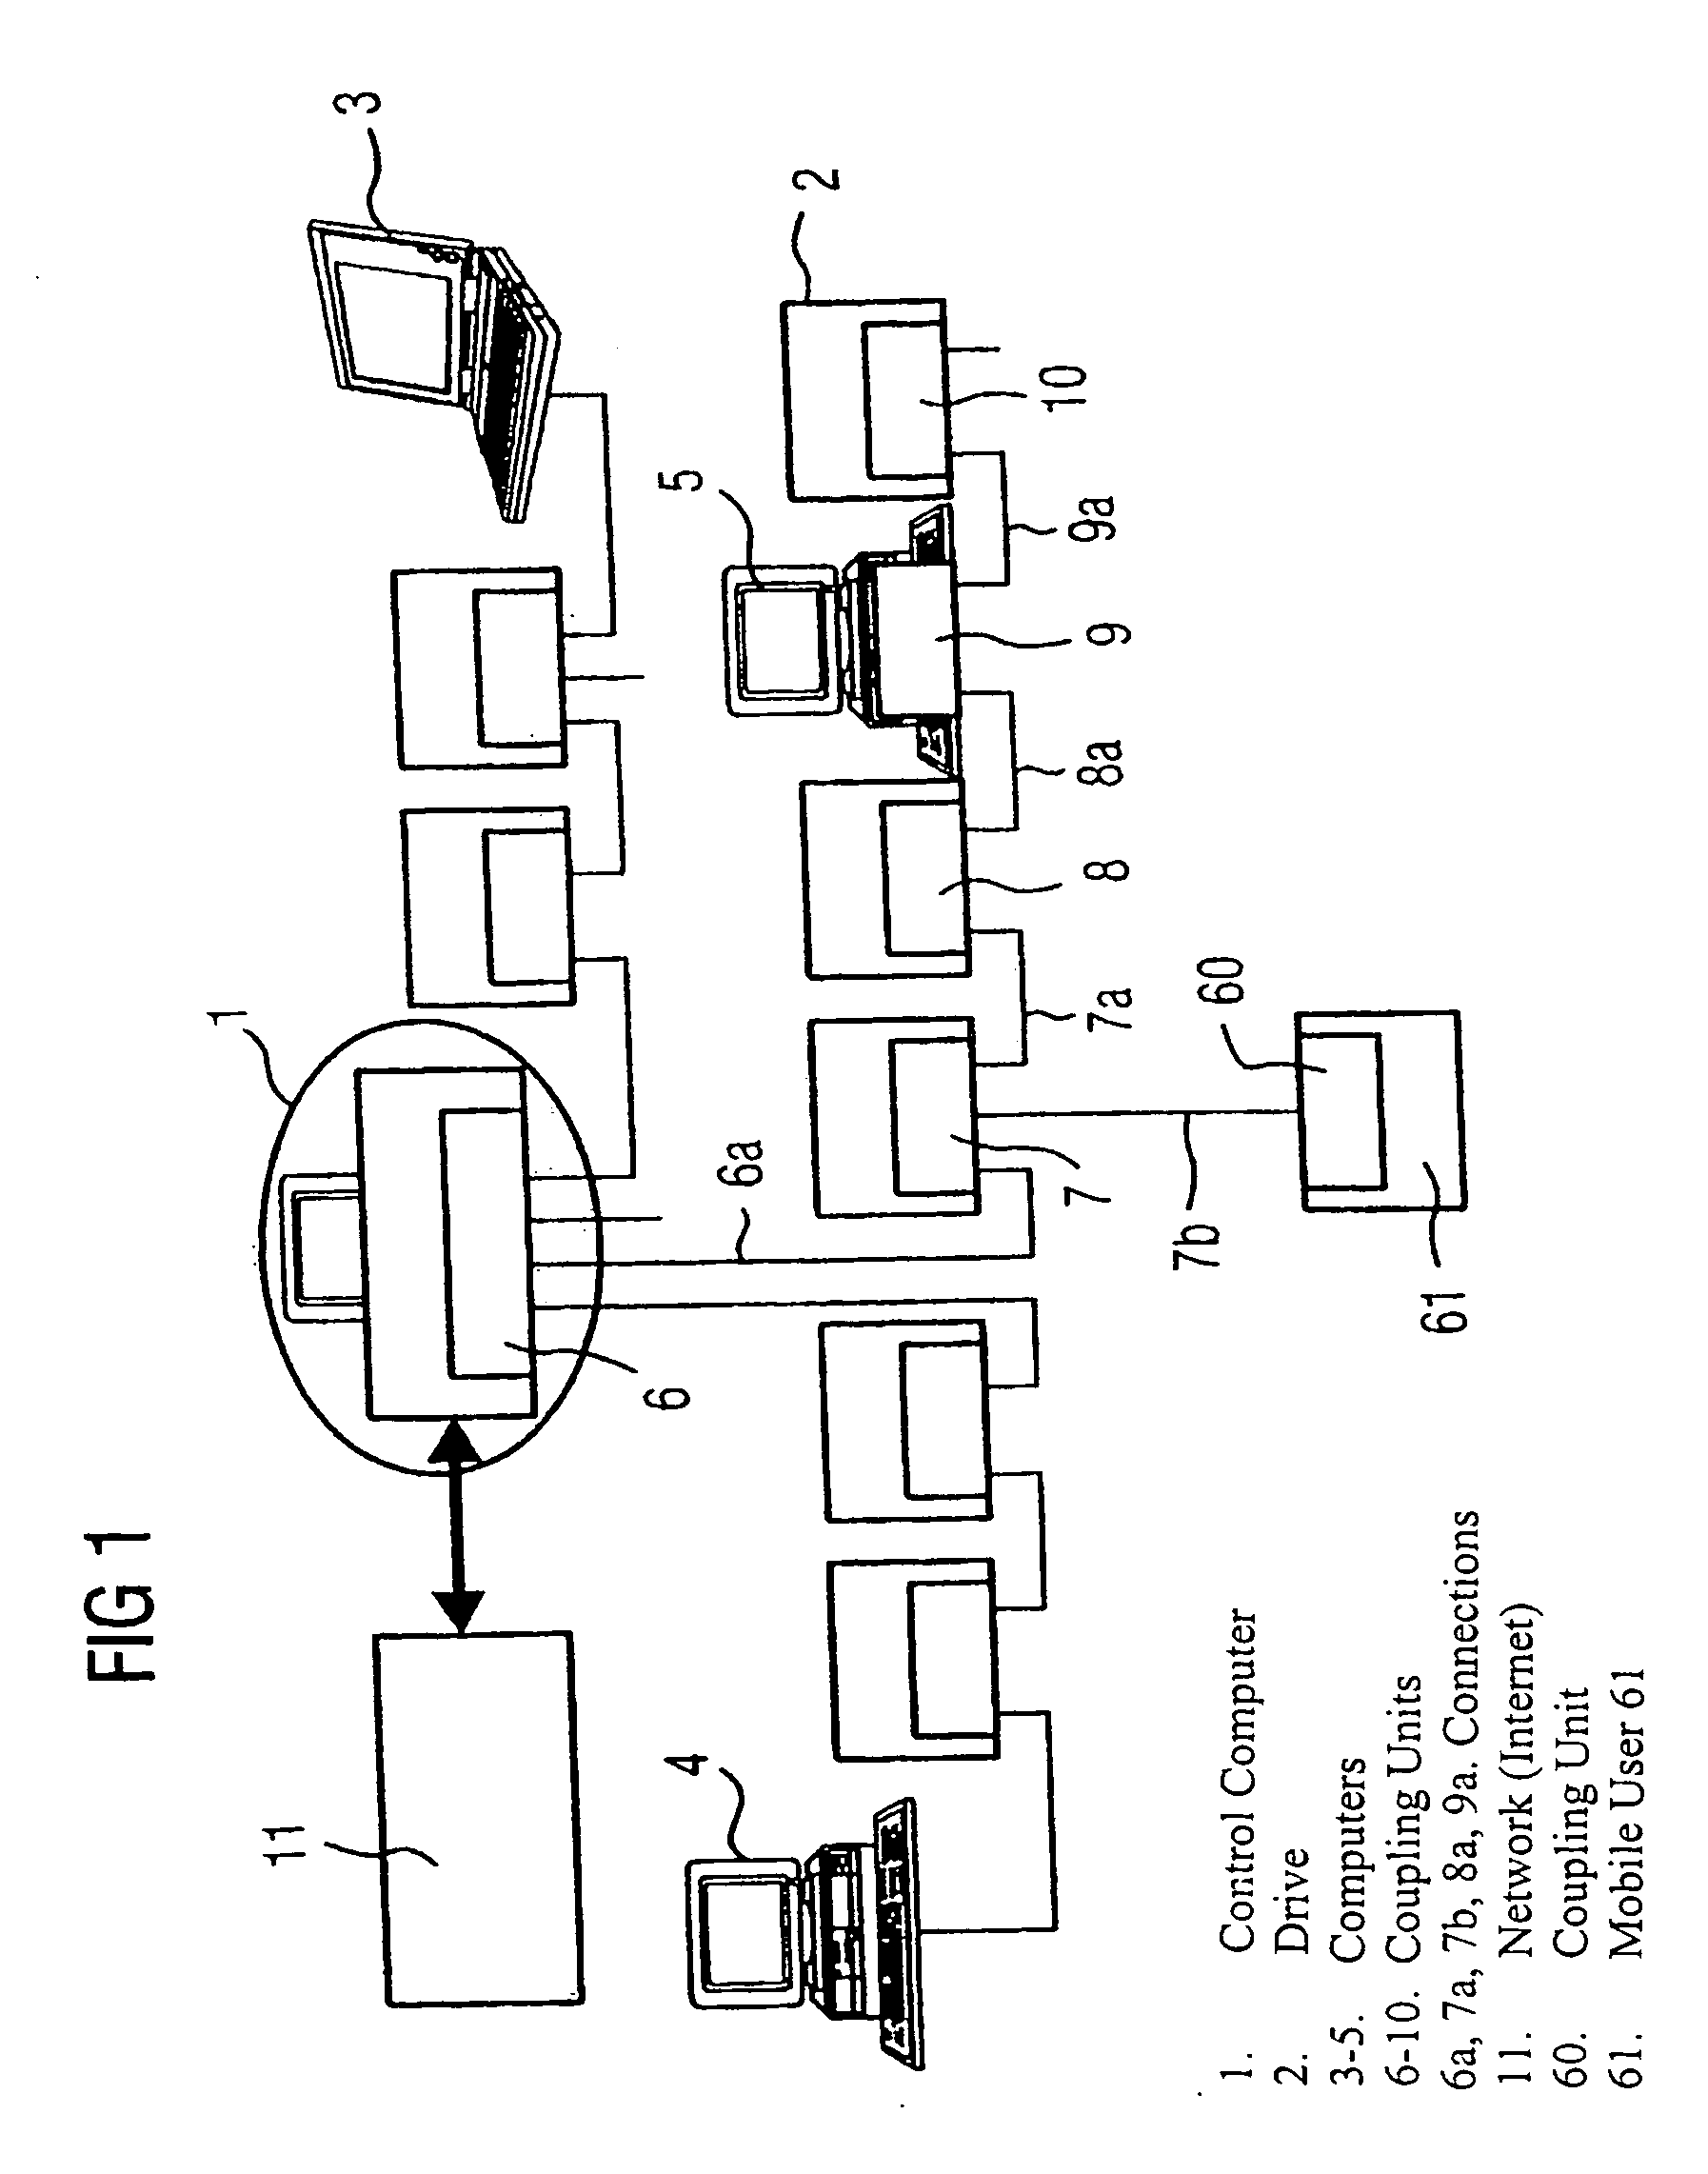 Method and system for transmitting data via switchable data networks